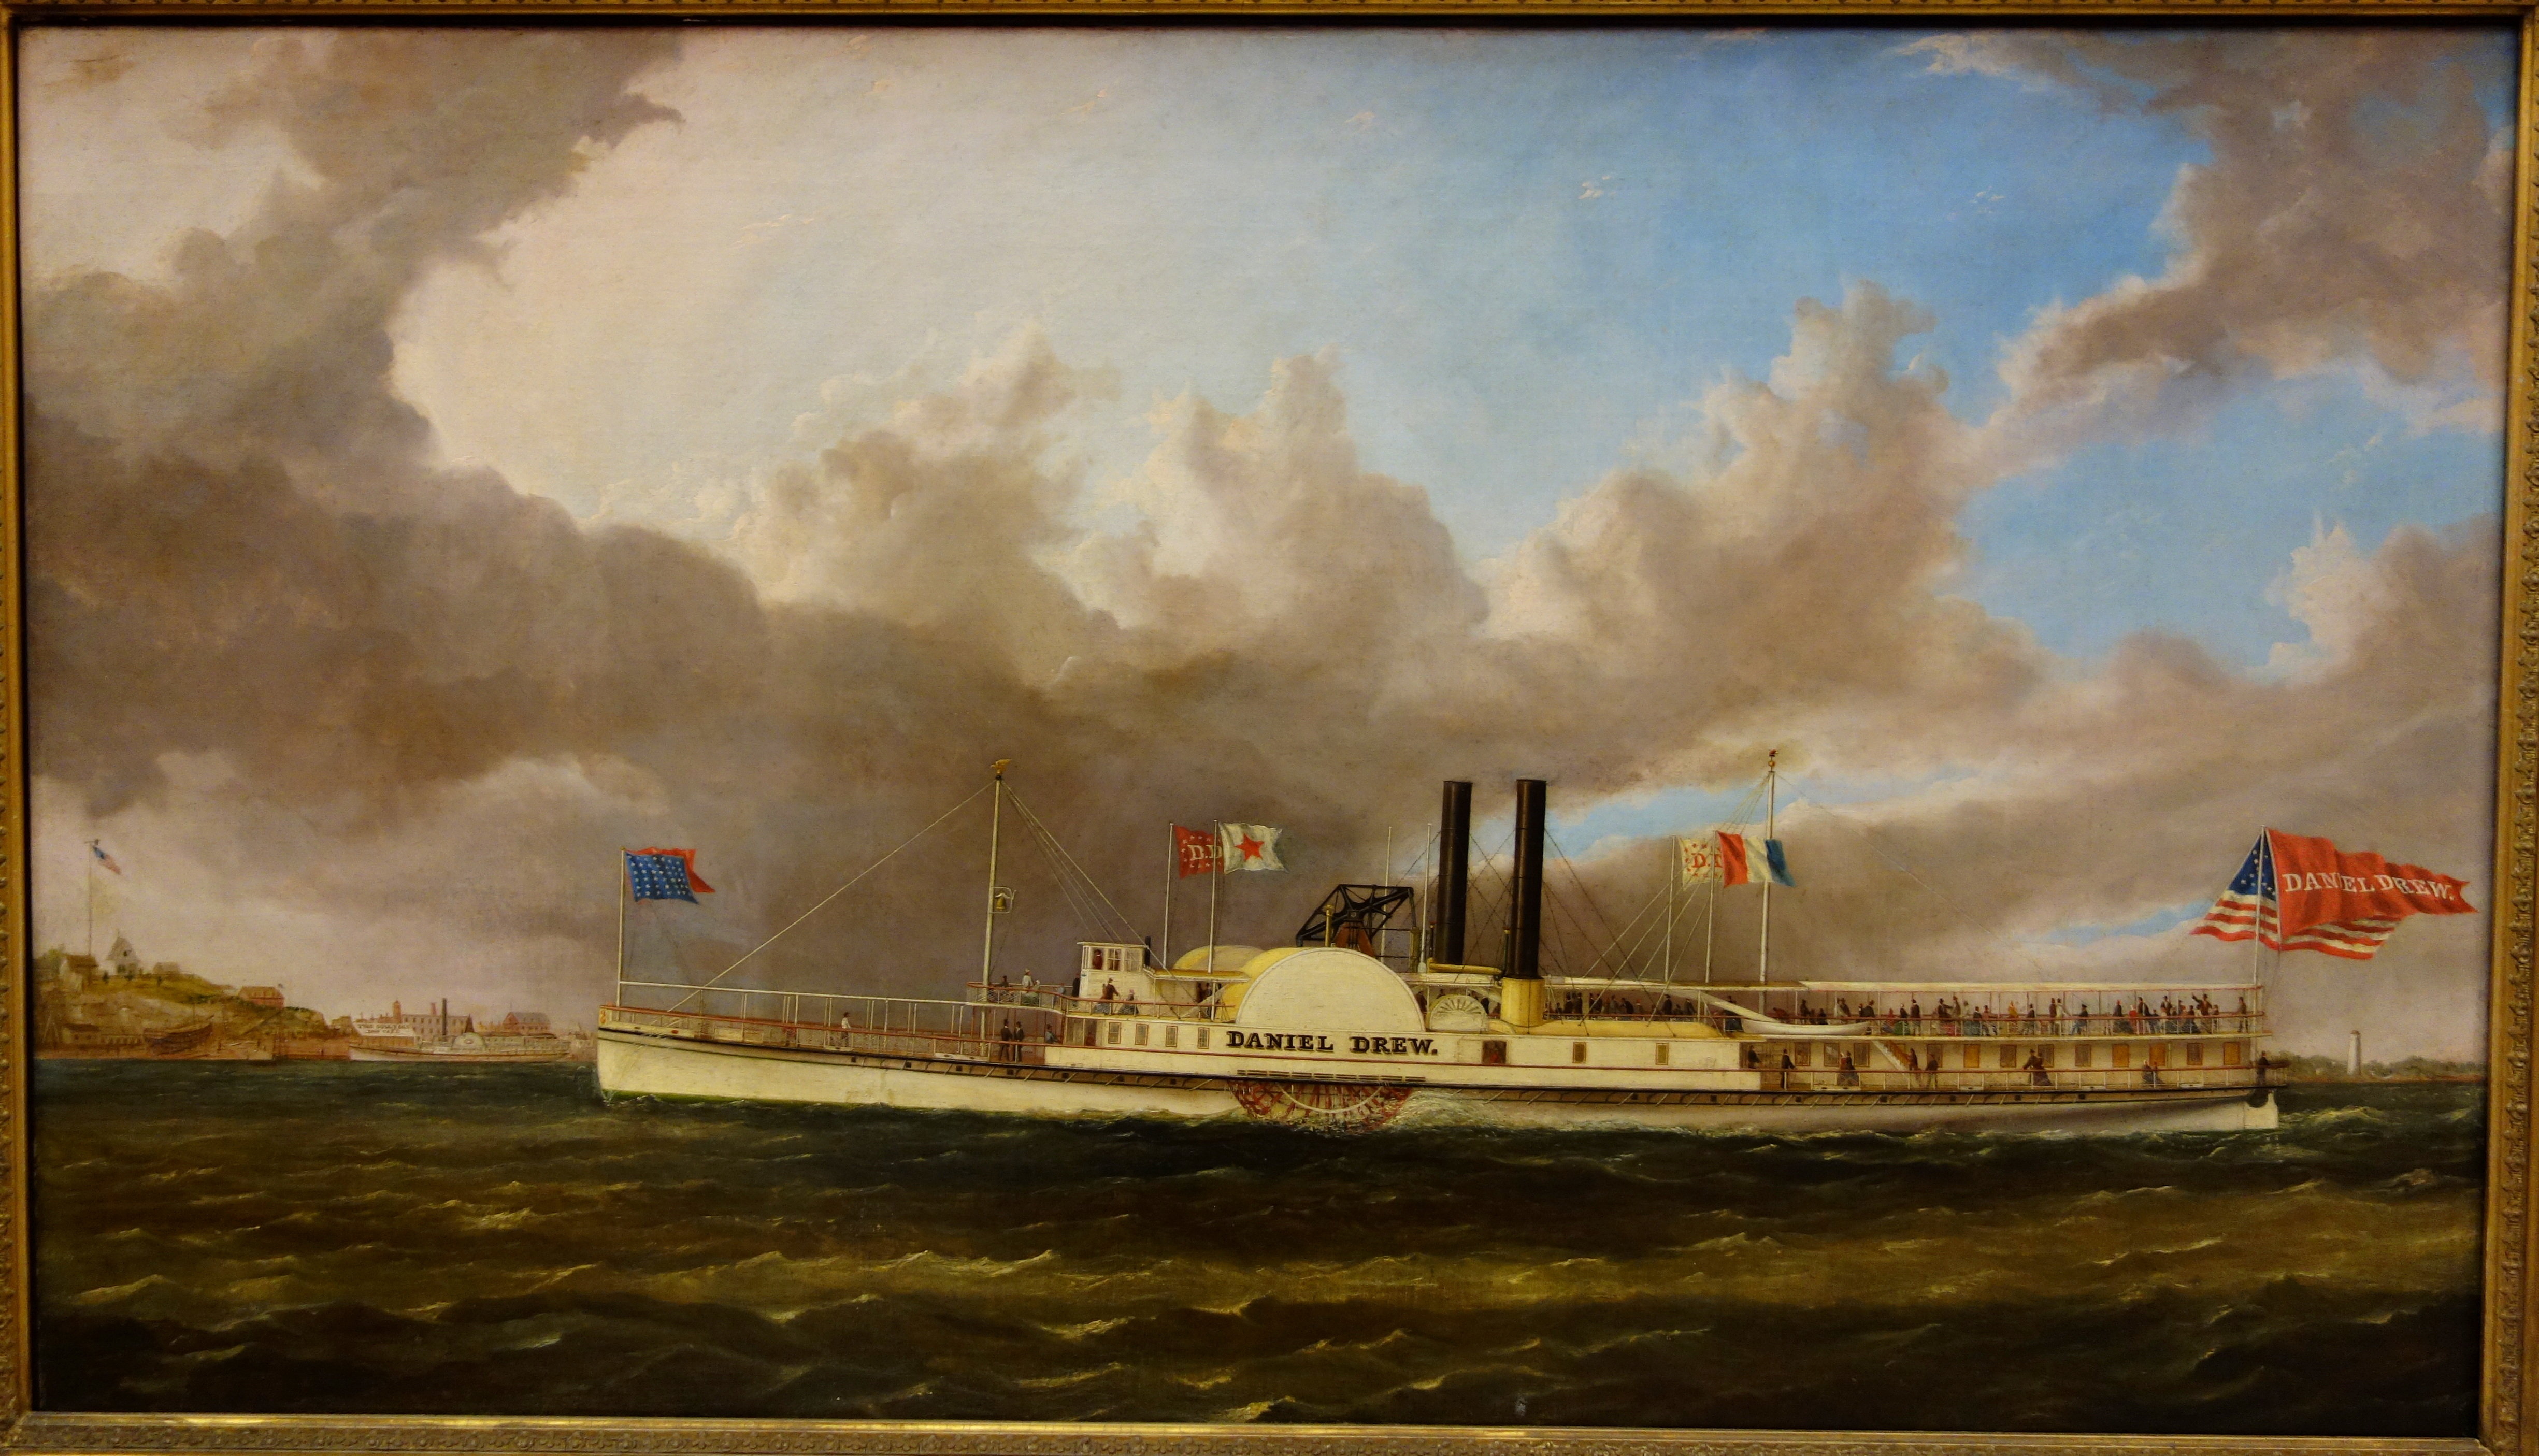 The Daniel Drew, steamboat on the Hudson River, by Joseph B. Smith, c. 1860, oil on canvas - Albany Institute of History and Art - DSC08102